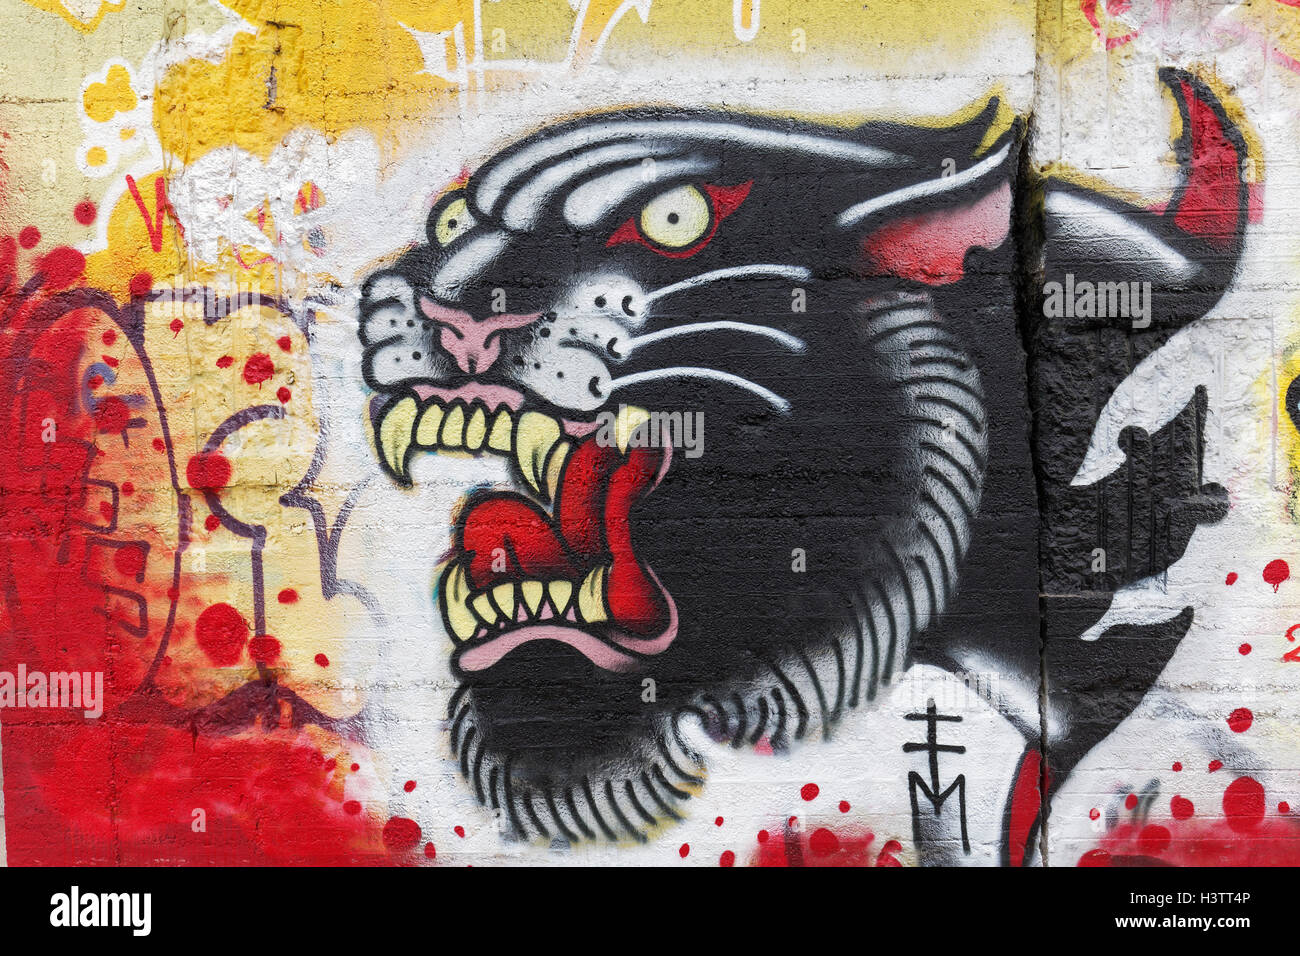 Panther with mouth open, graffiti, street art, Duisburg, North Rhine-Westphalia, Germany Stock Photo